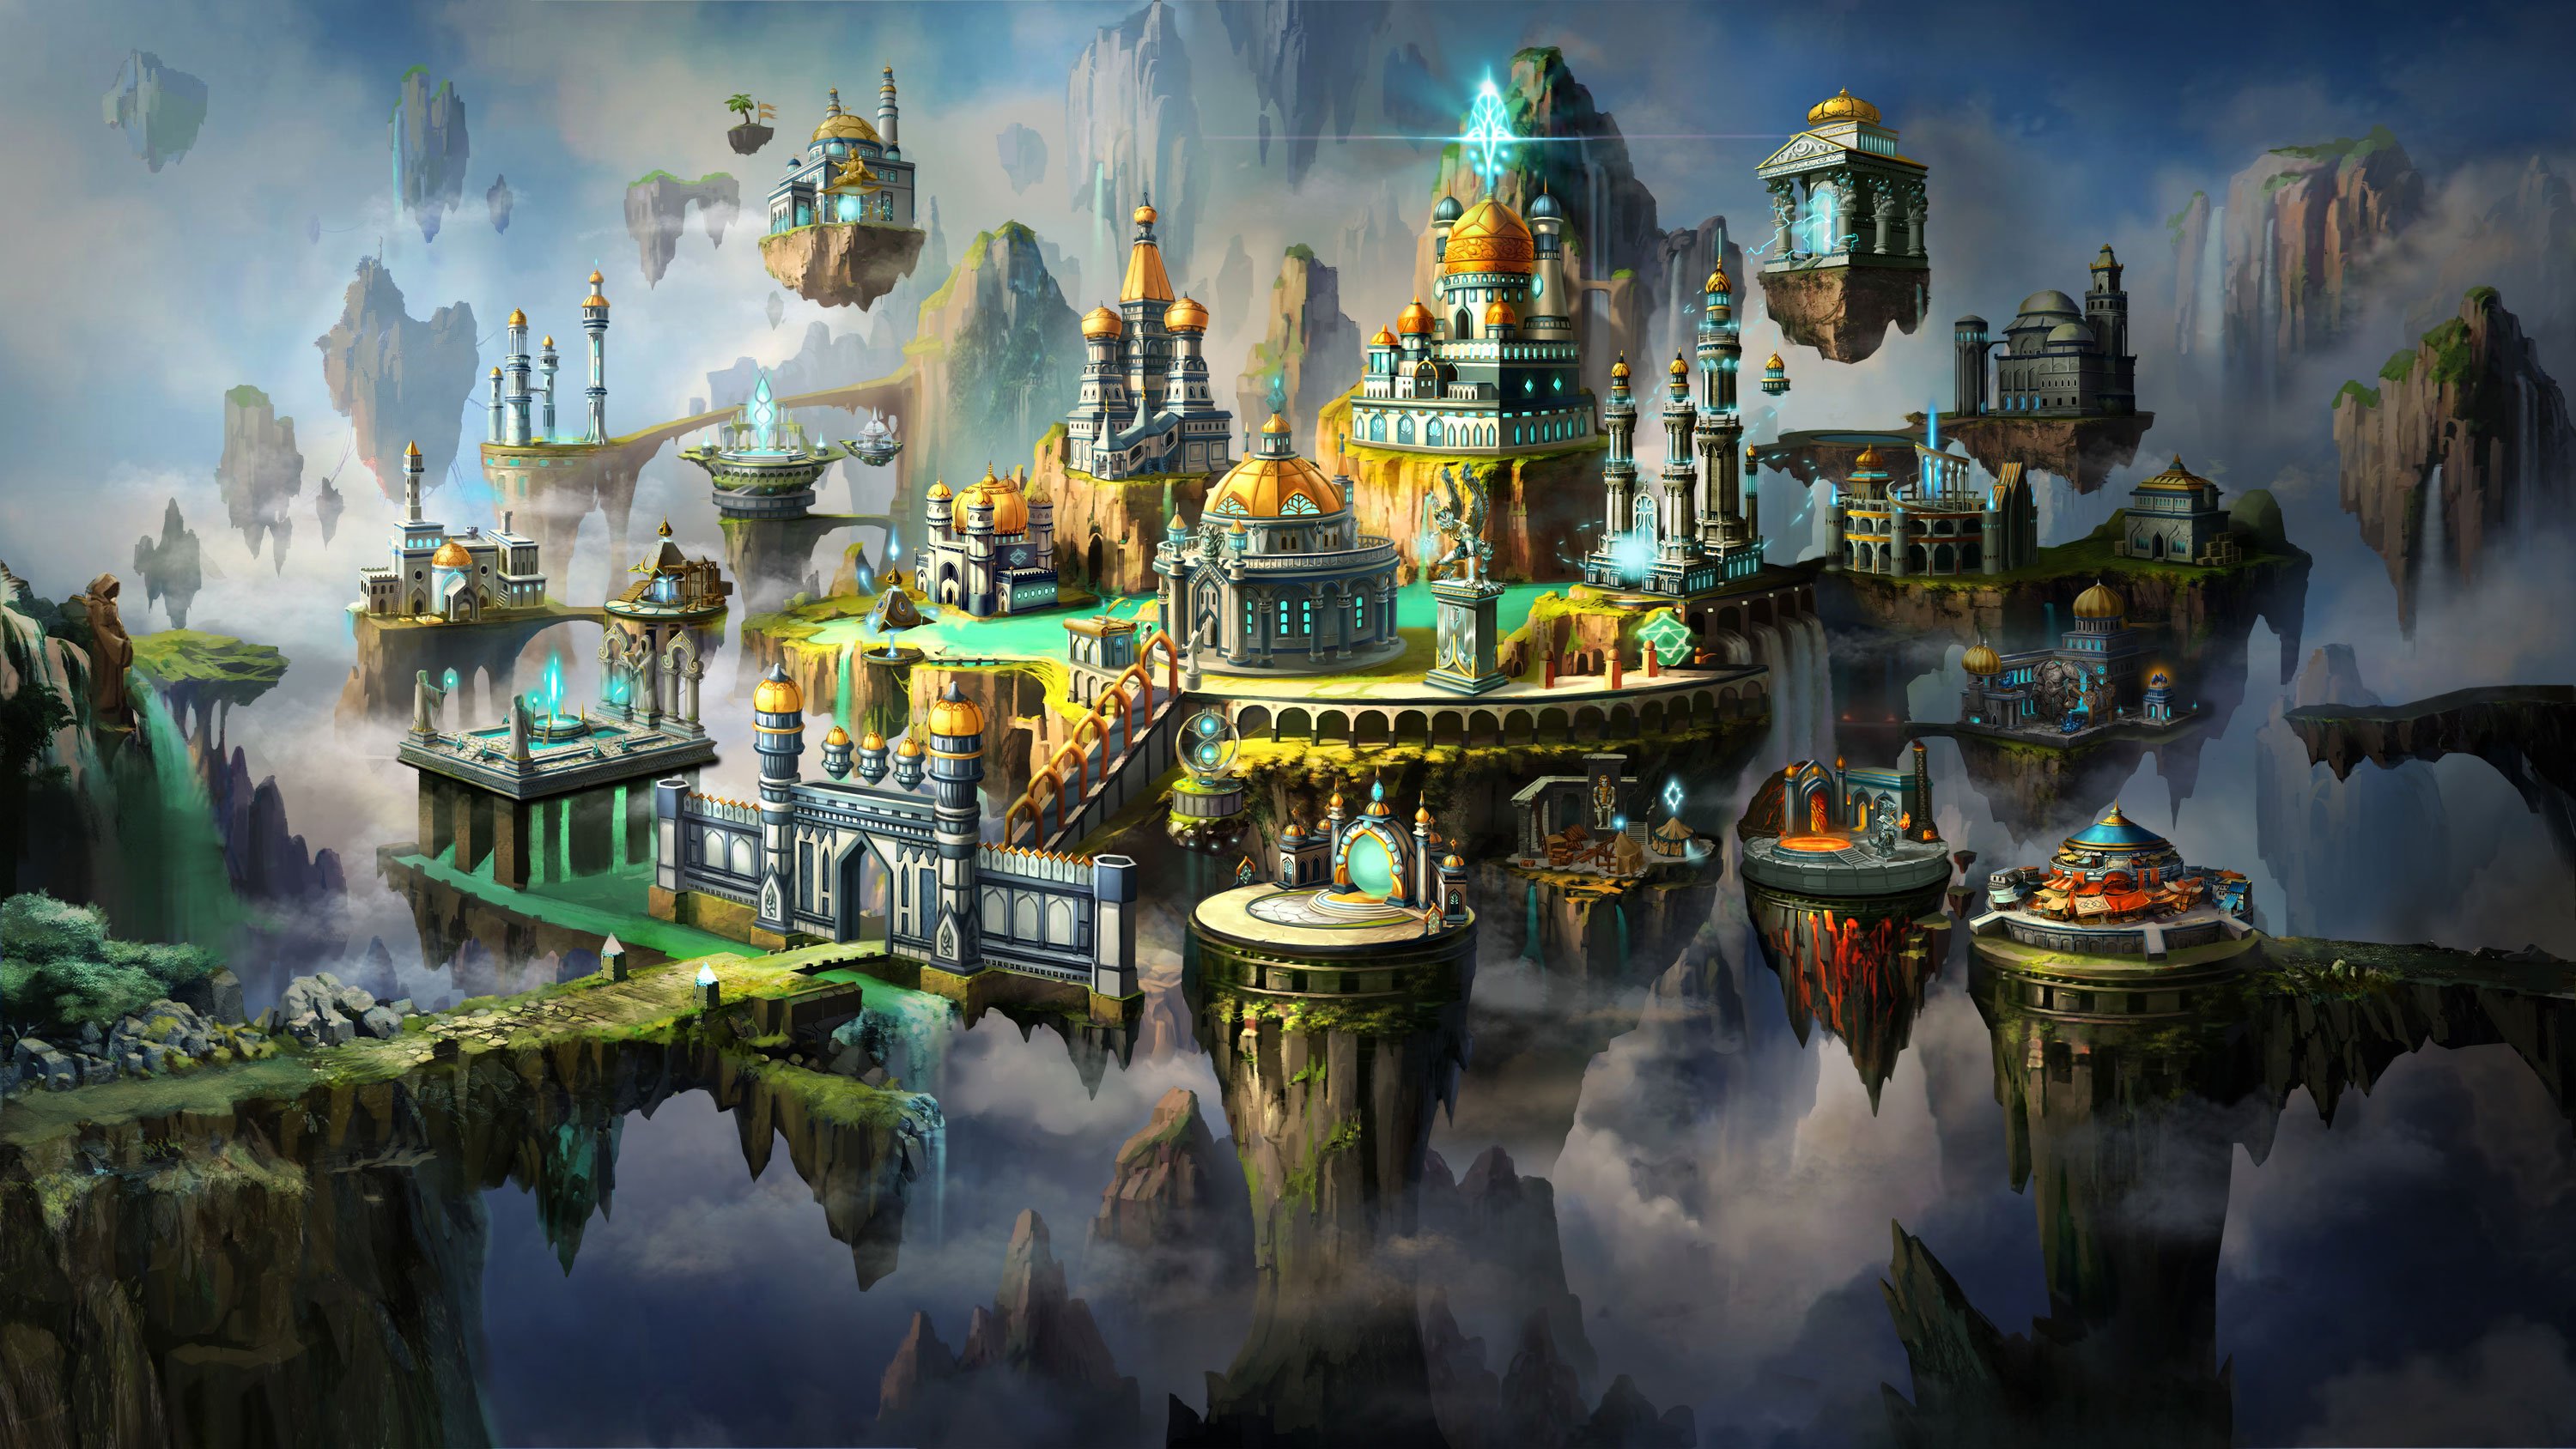 heroes, Might, Magic, Strategy, Fantasy, Fighting, Adventure, Action, Online, 1hmm, Castle, City, Cities, Island Wallpaper